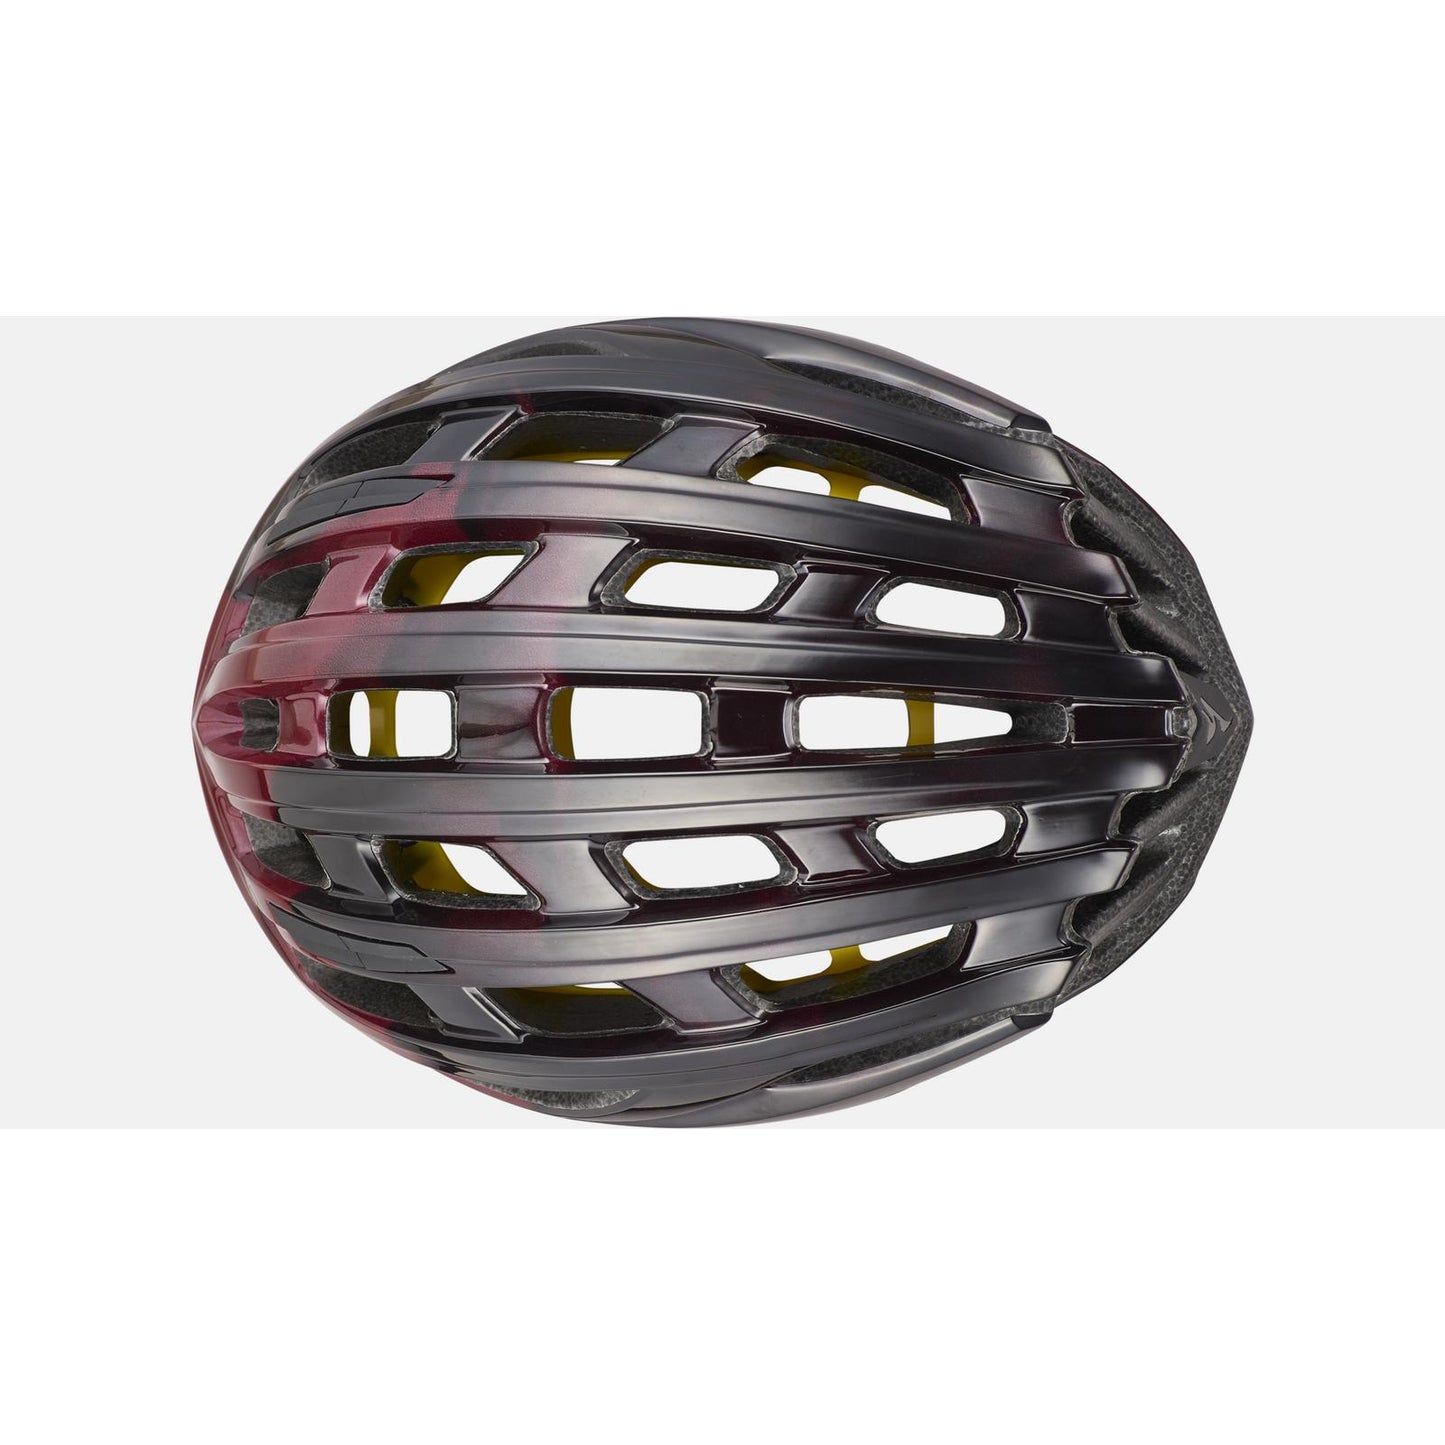 Specialized Propero III - Helmets - Bicycle Warehouse